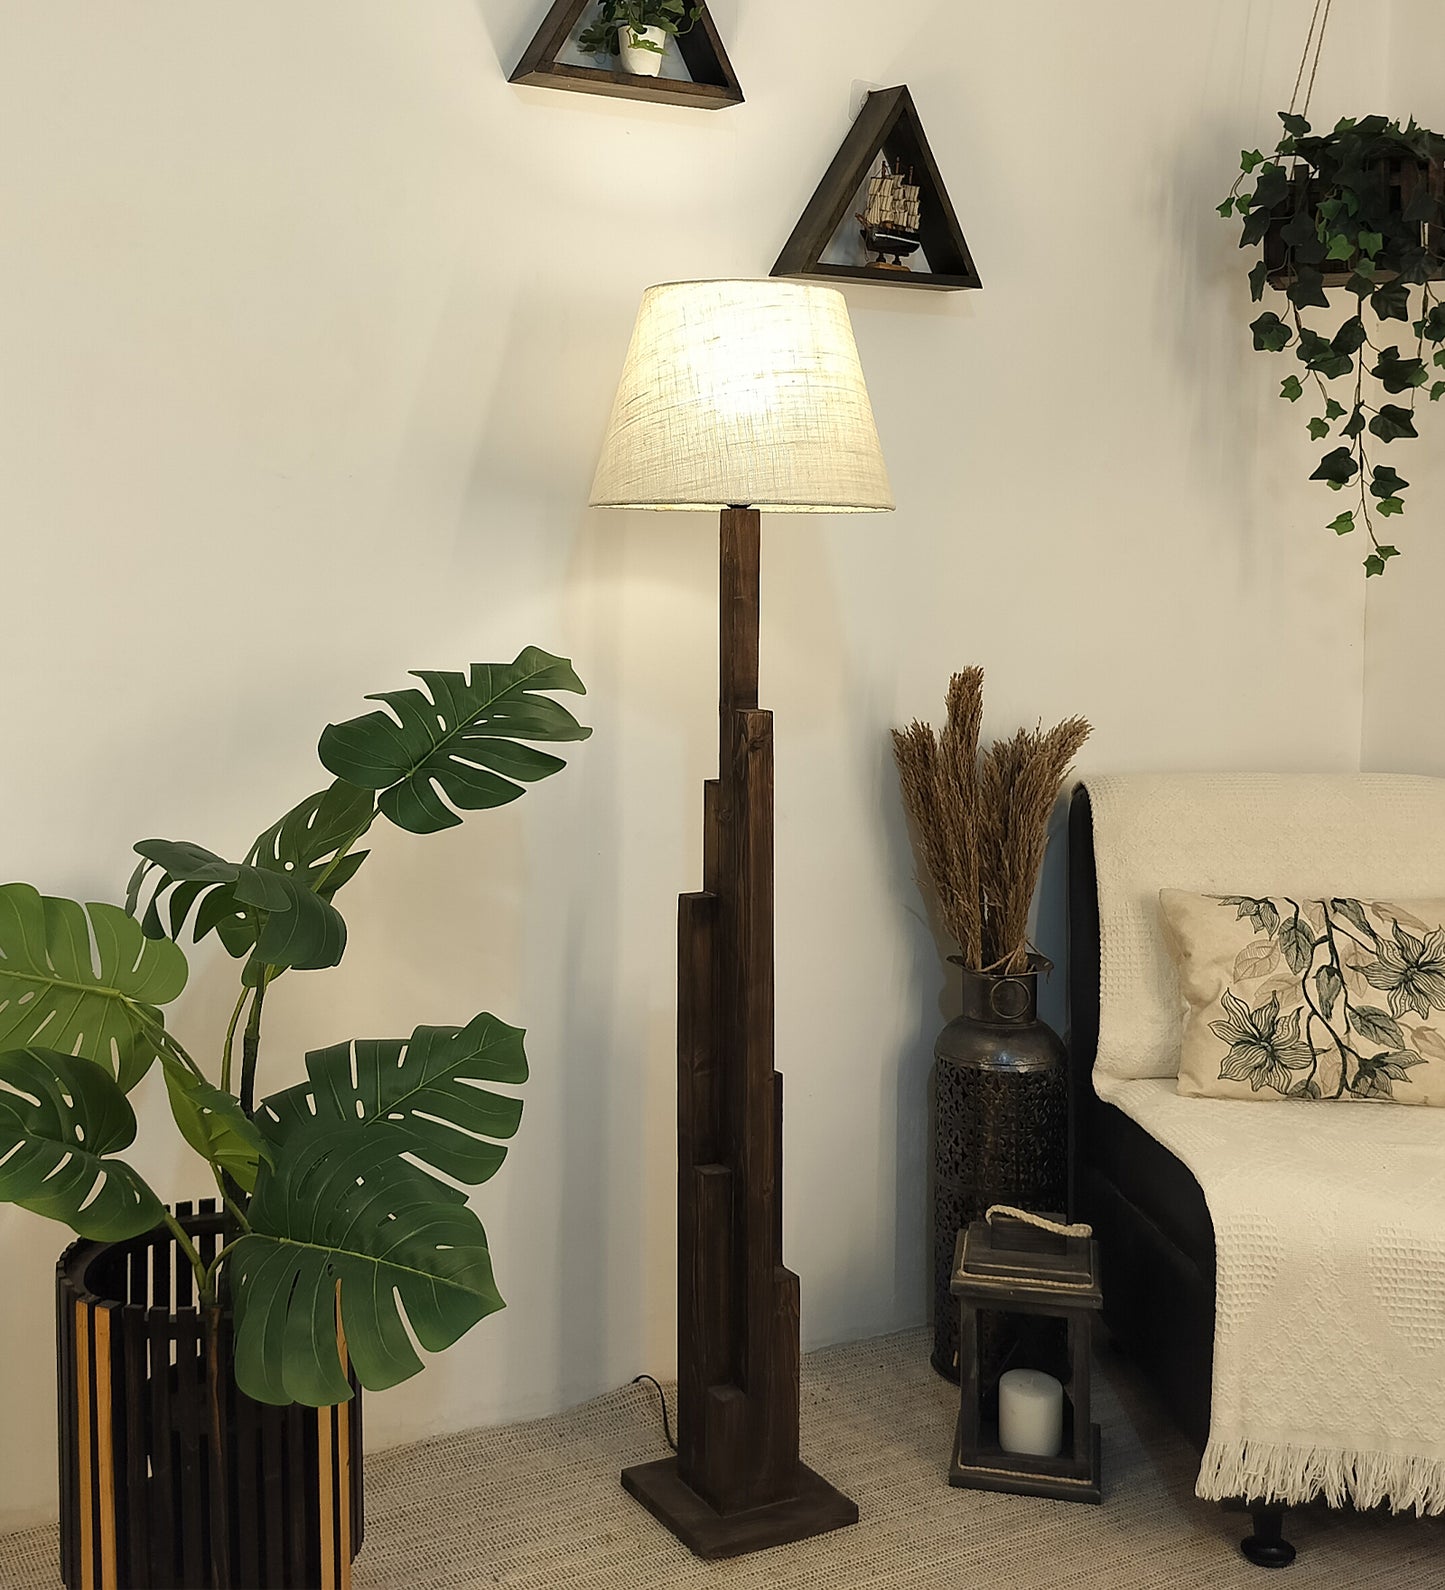 Skyline Wooden Floor Lamp with Brown Base and Yellow Printed Fabric Lampshade